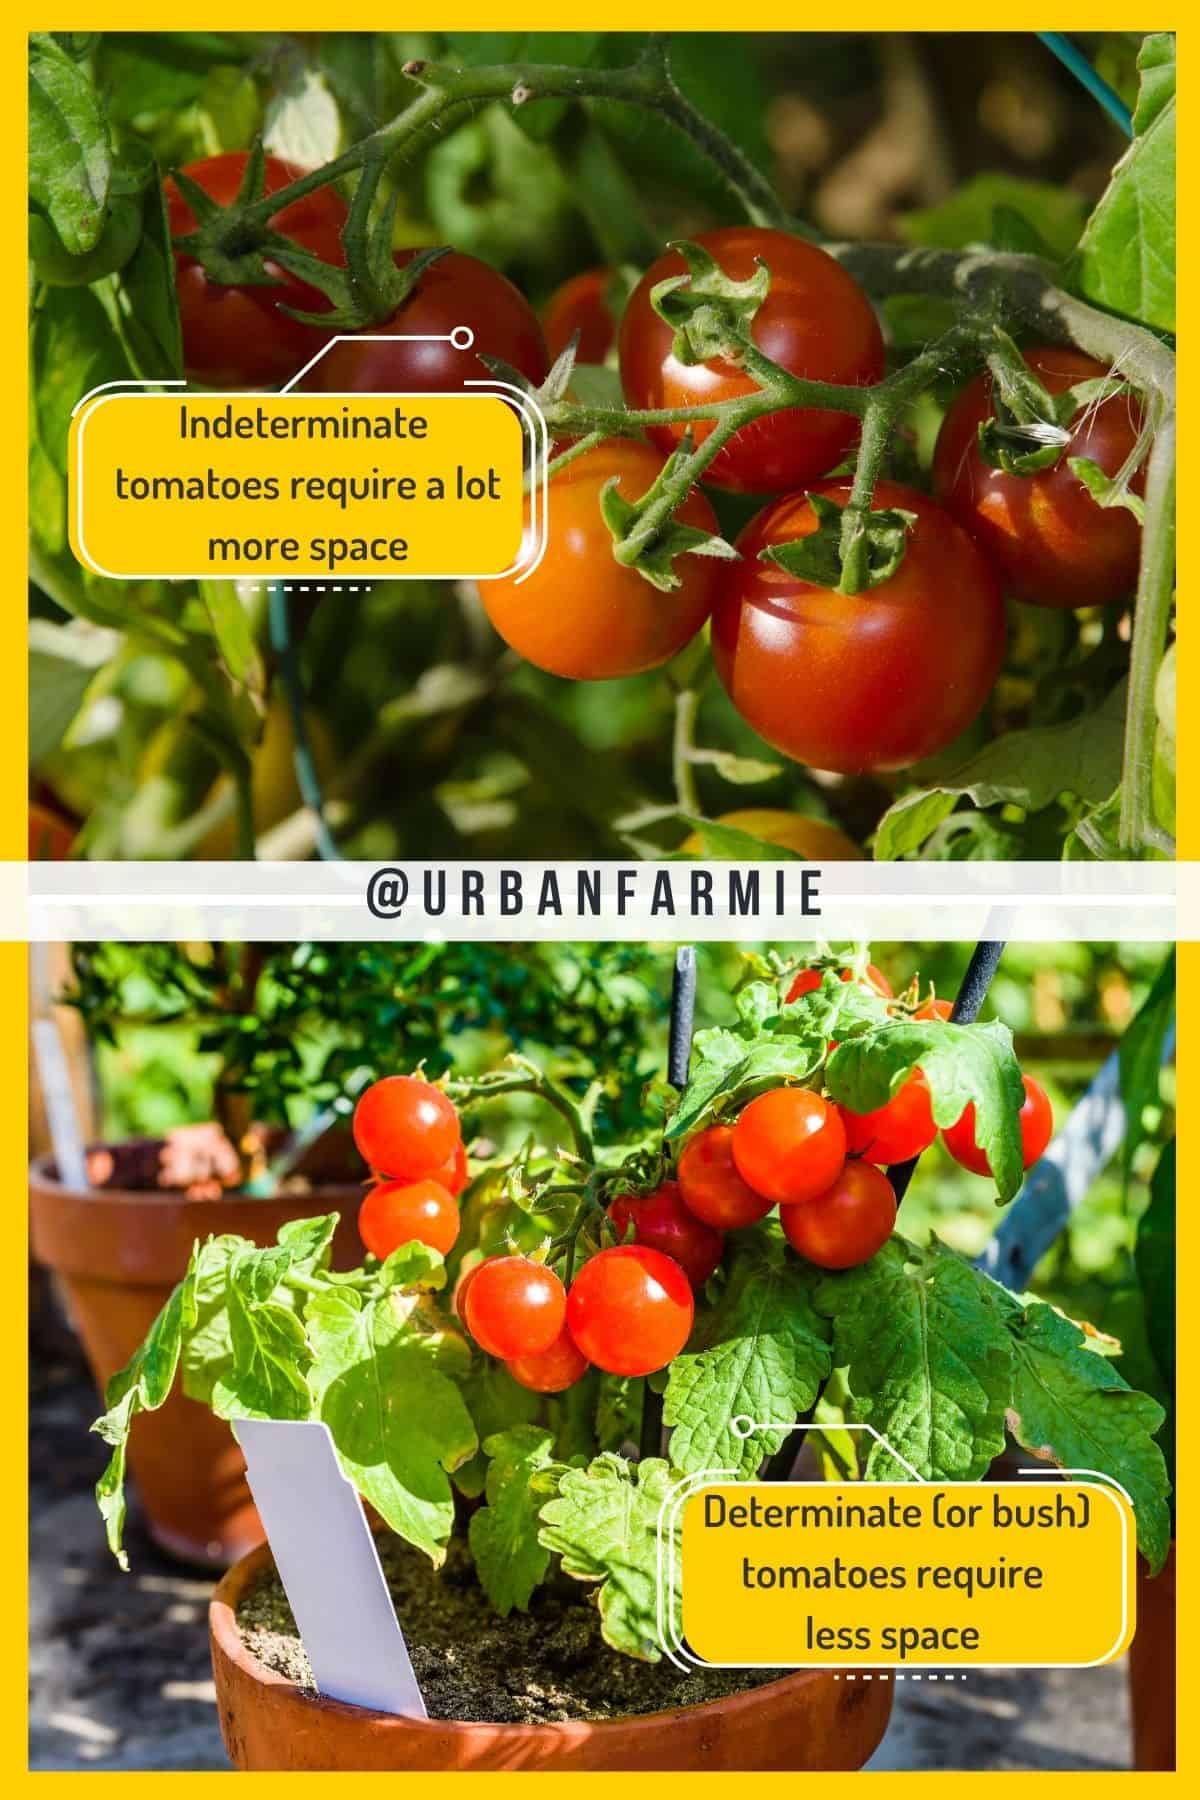 Two panel collage showing determinate and indeterminate tomatoes with callout boxes. 